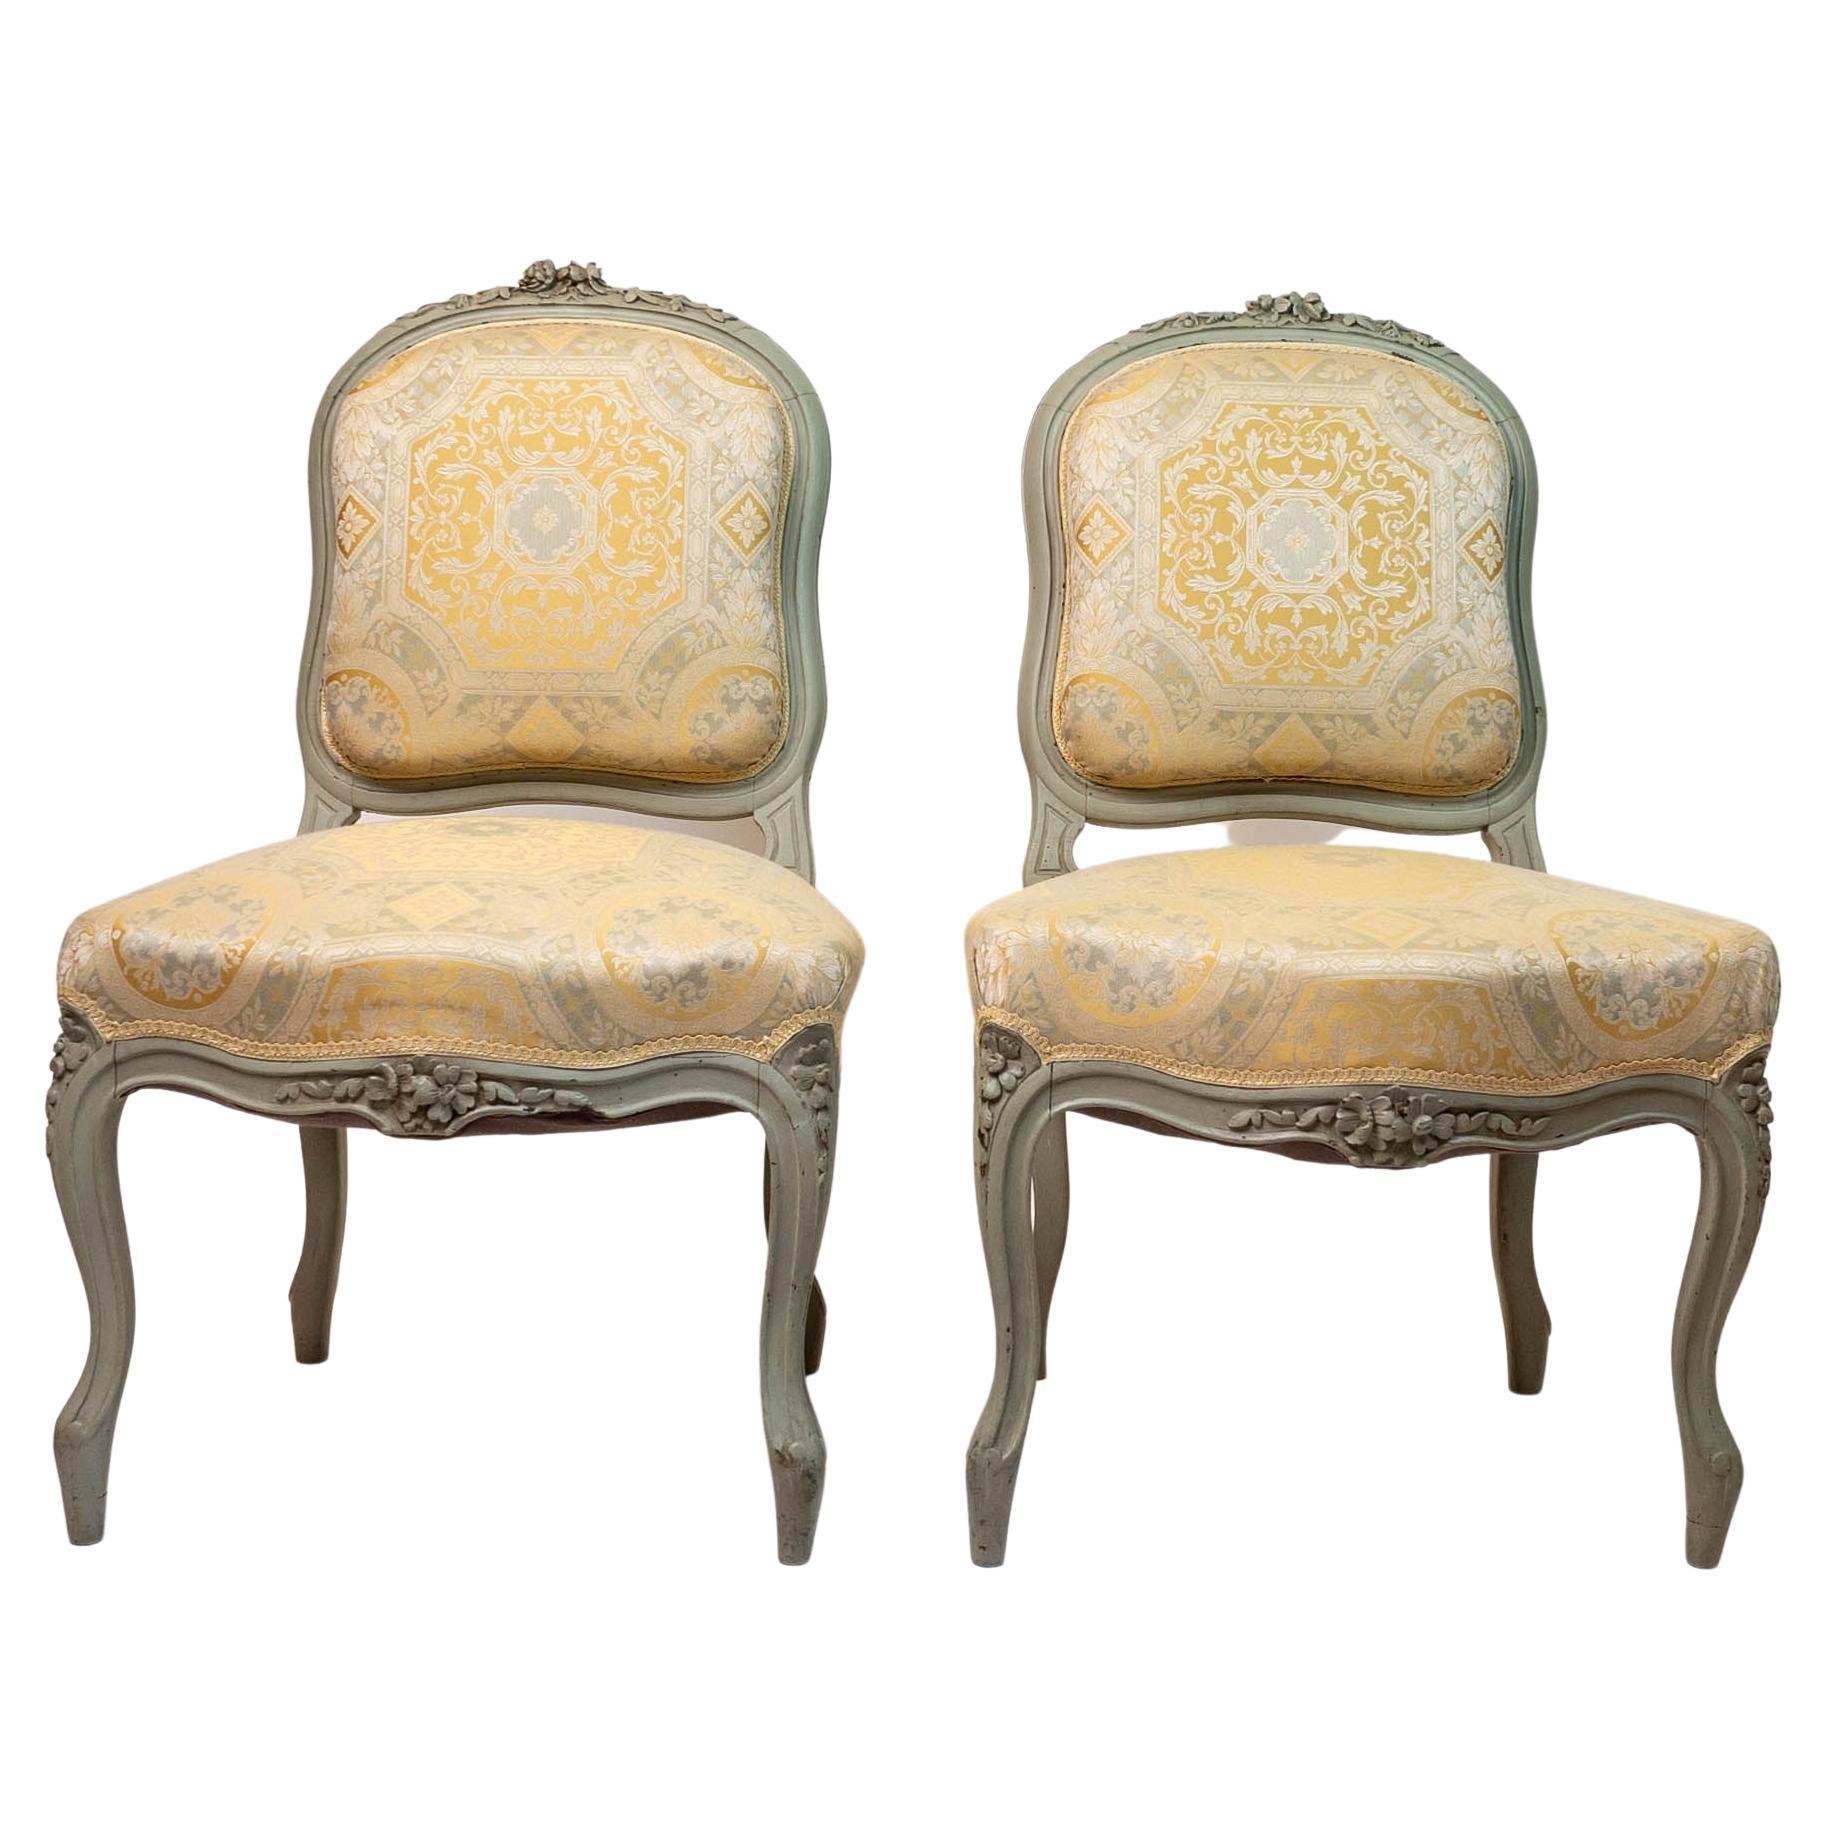 Romantic Celadon Painted Pair of Carved Wood French Louis XV Style Side Chairs For Sale